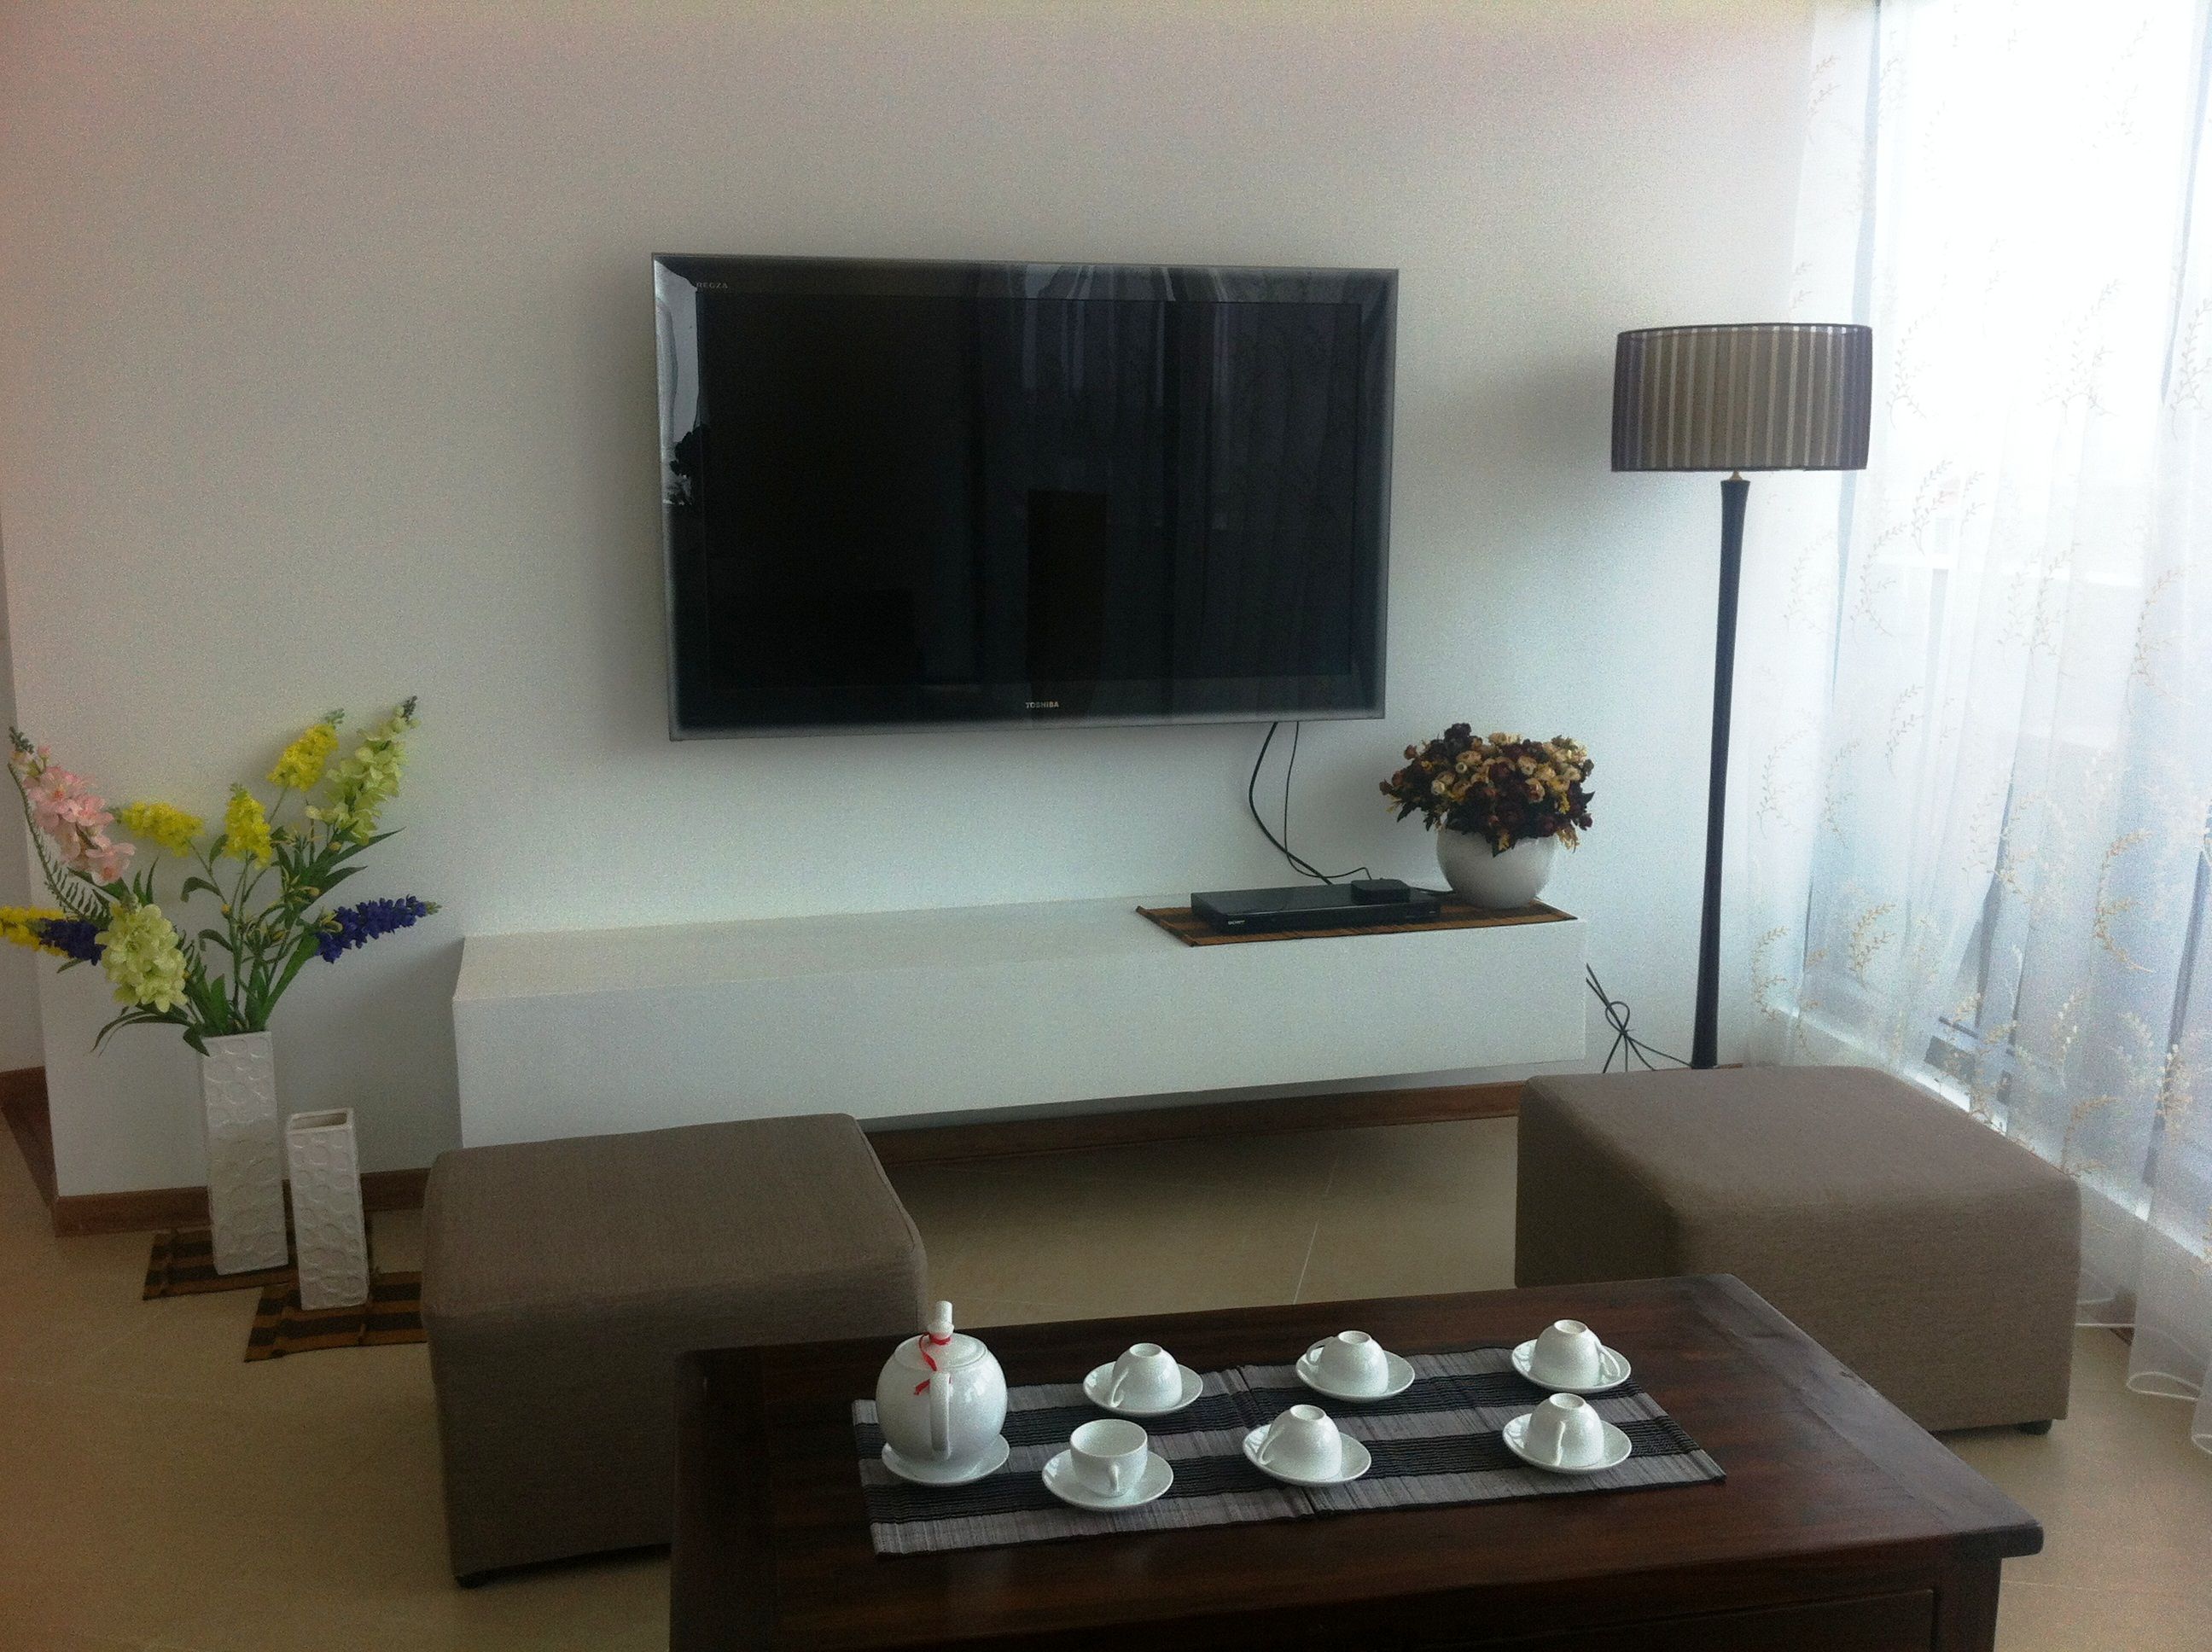 2 bedroom apartment for rent in Eurowindow Multi Complex, Tran Duy Hung str, Cau Giay dist